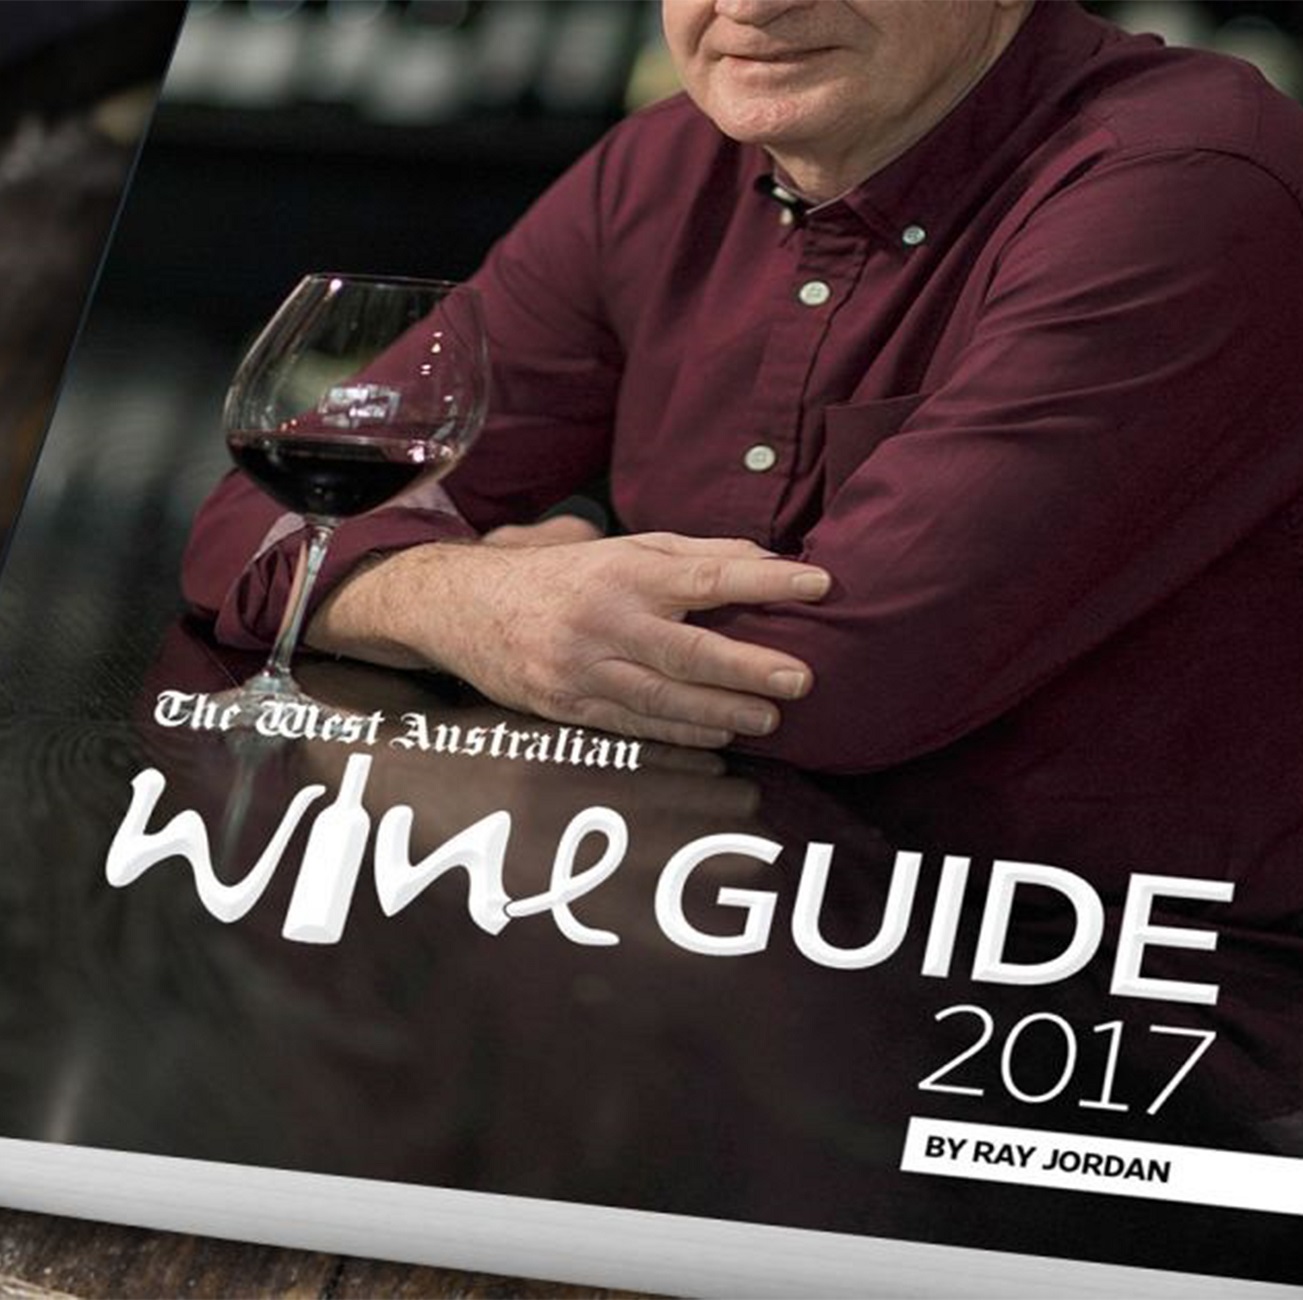 The Wine Guide